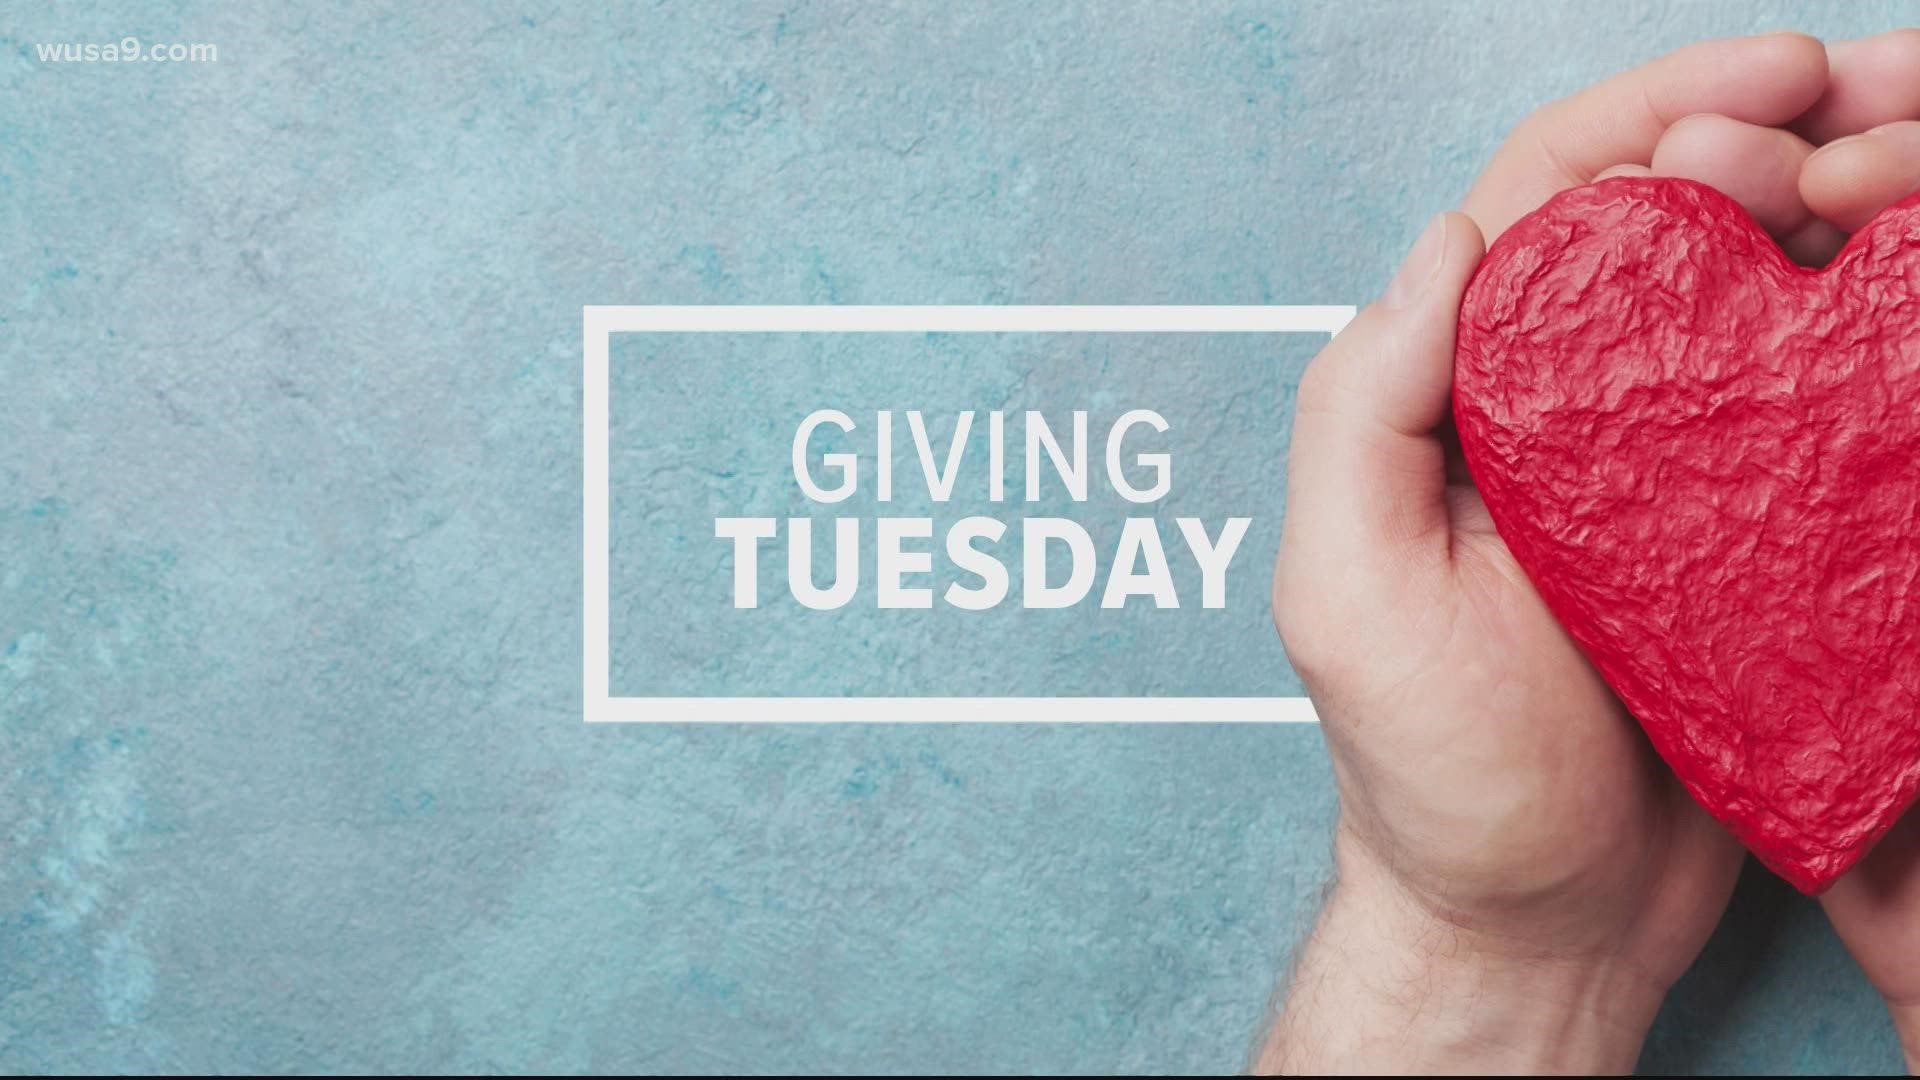 On the 10th anniversary of the holiday following consumer holidays such as Black Friday and Cyber Monday, Verify looks at how Giving Tuesday changed donation habits.